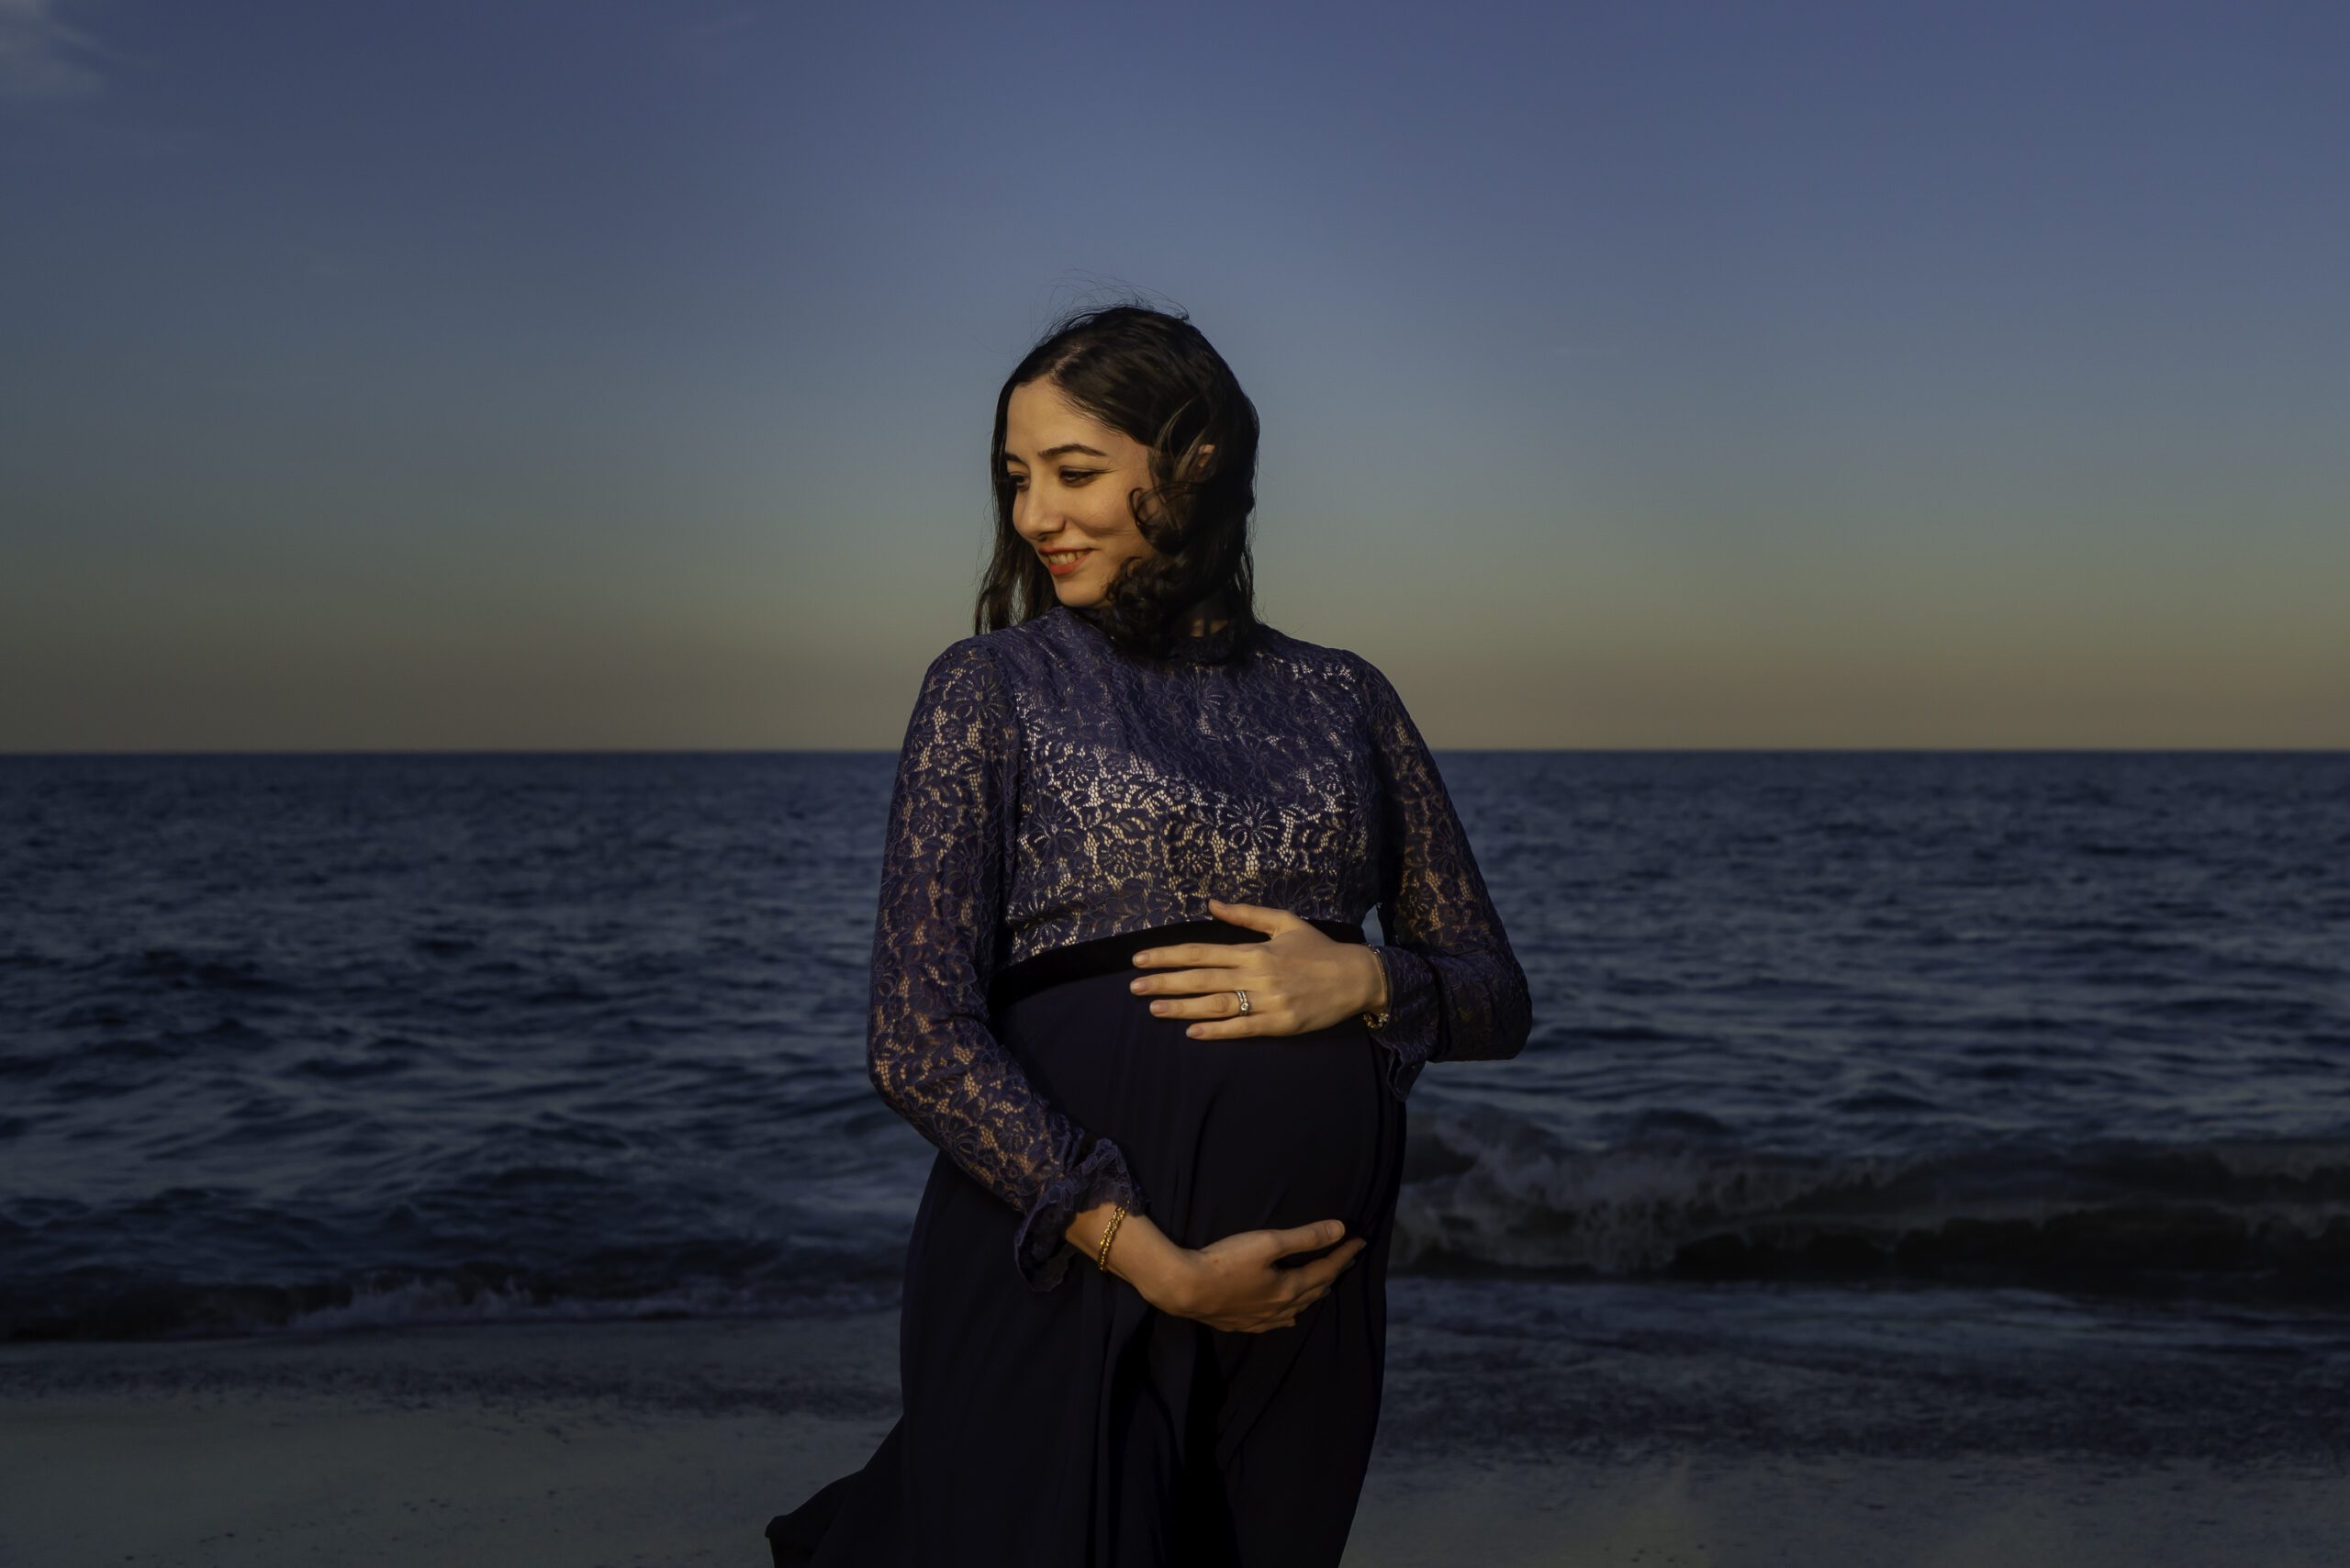 a pregnant woman standing on the beach at sunset